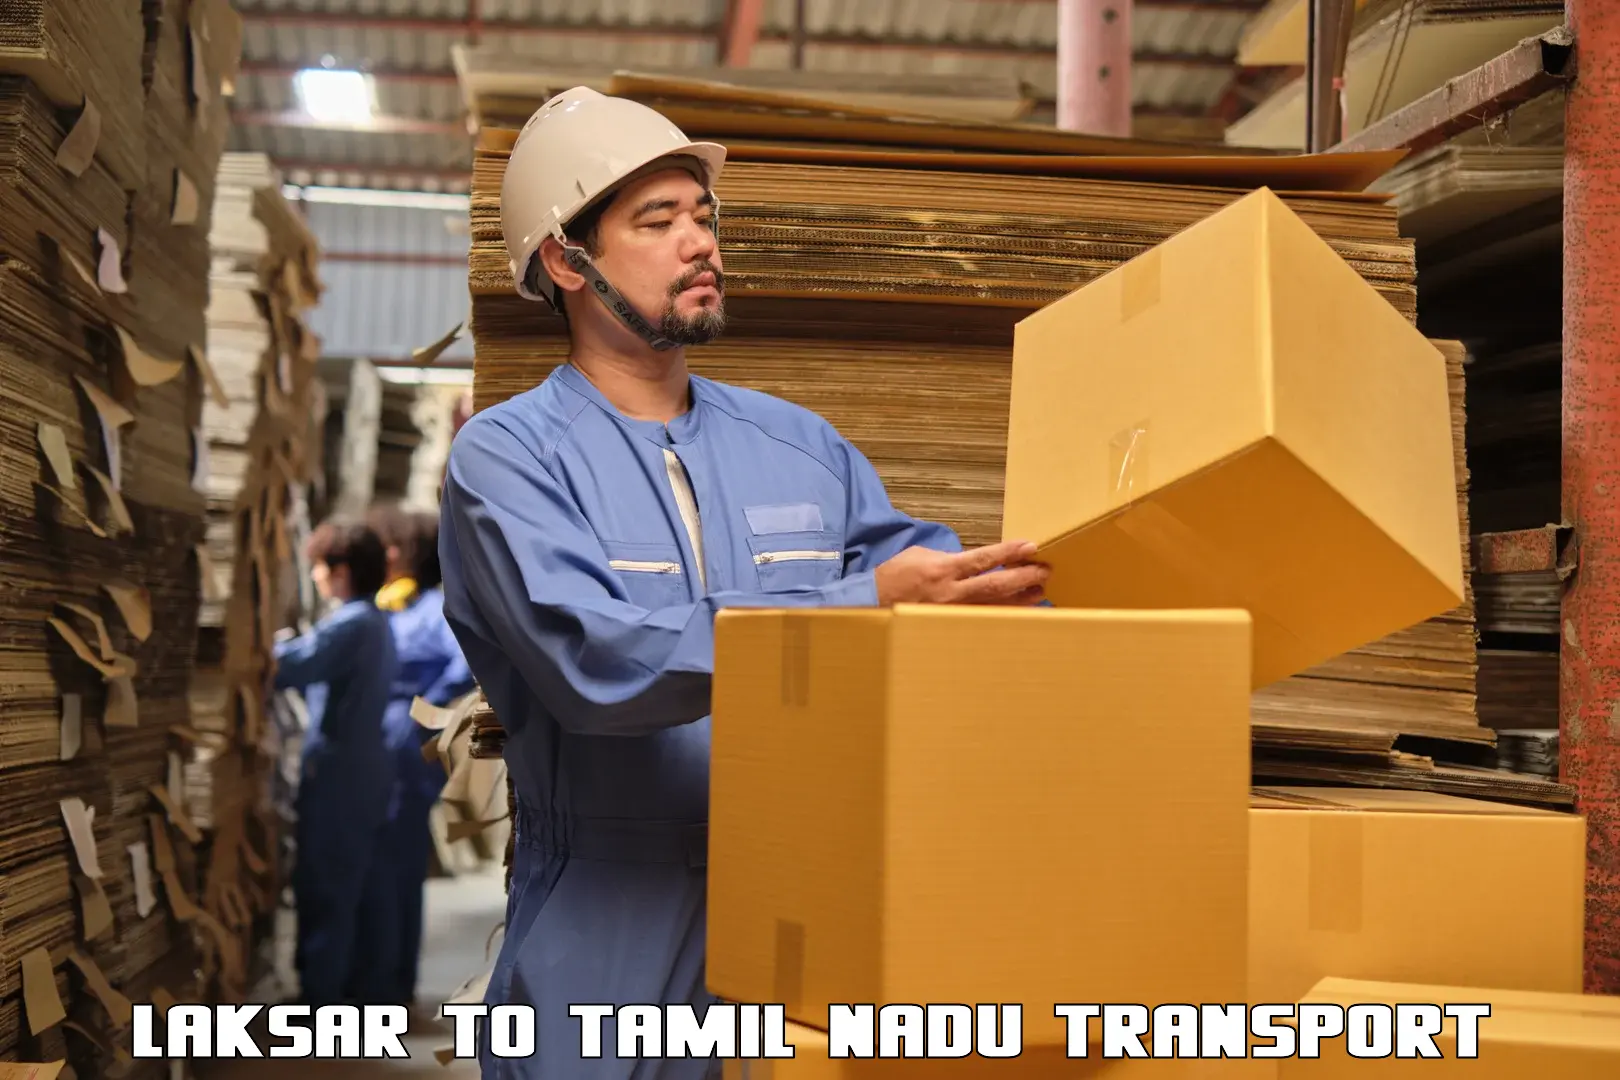 Commercial transport service Laksar to Ennore Port Chennai